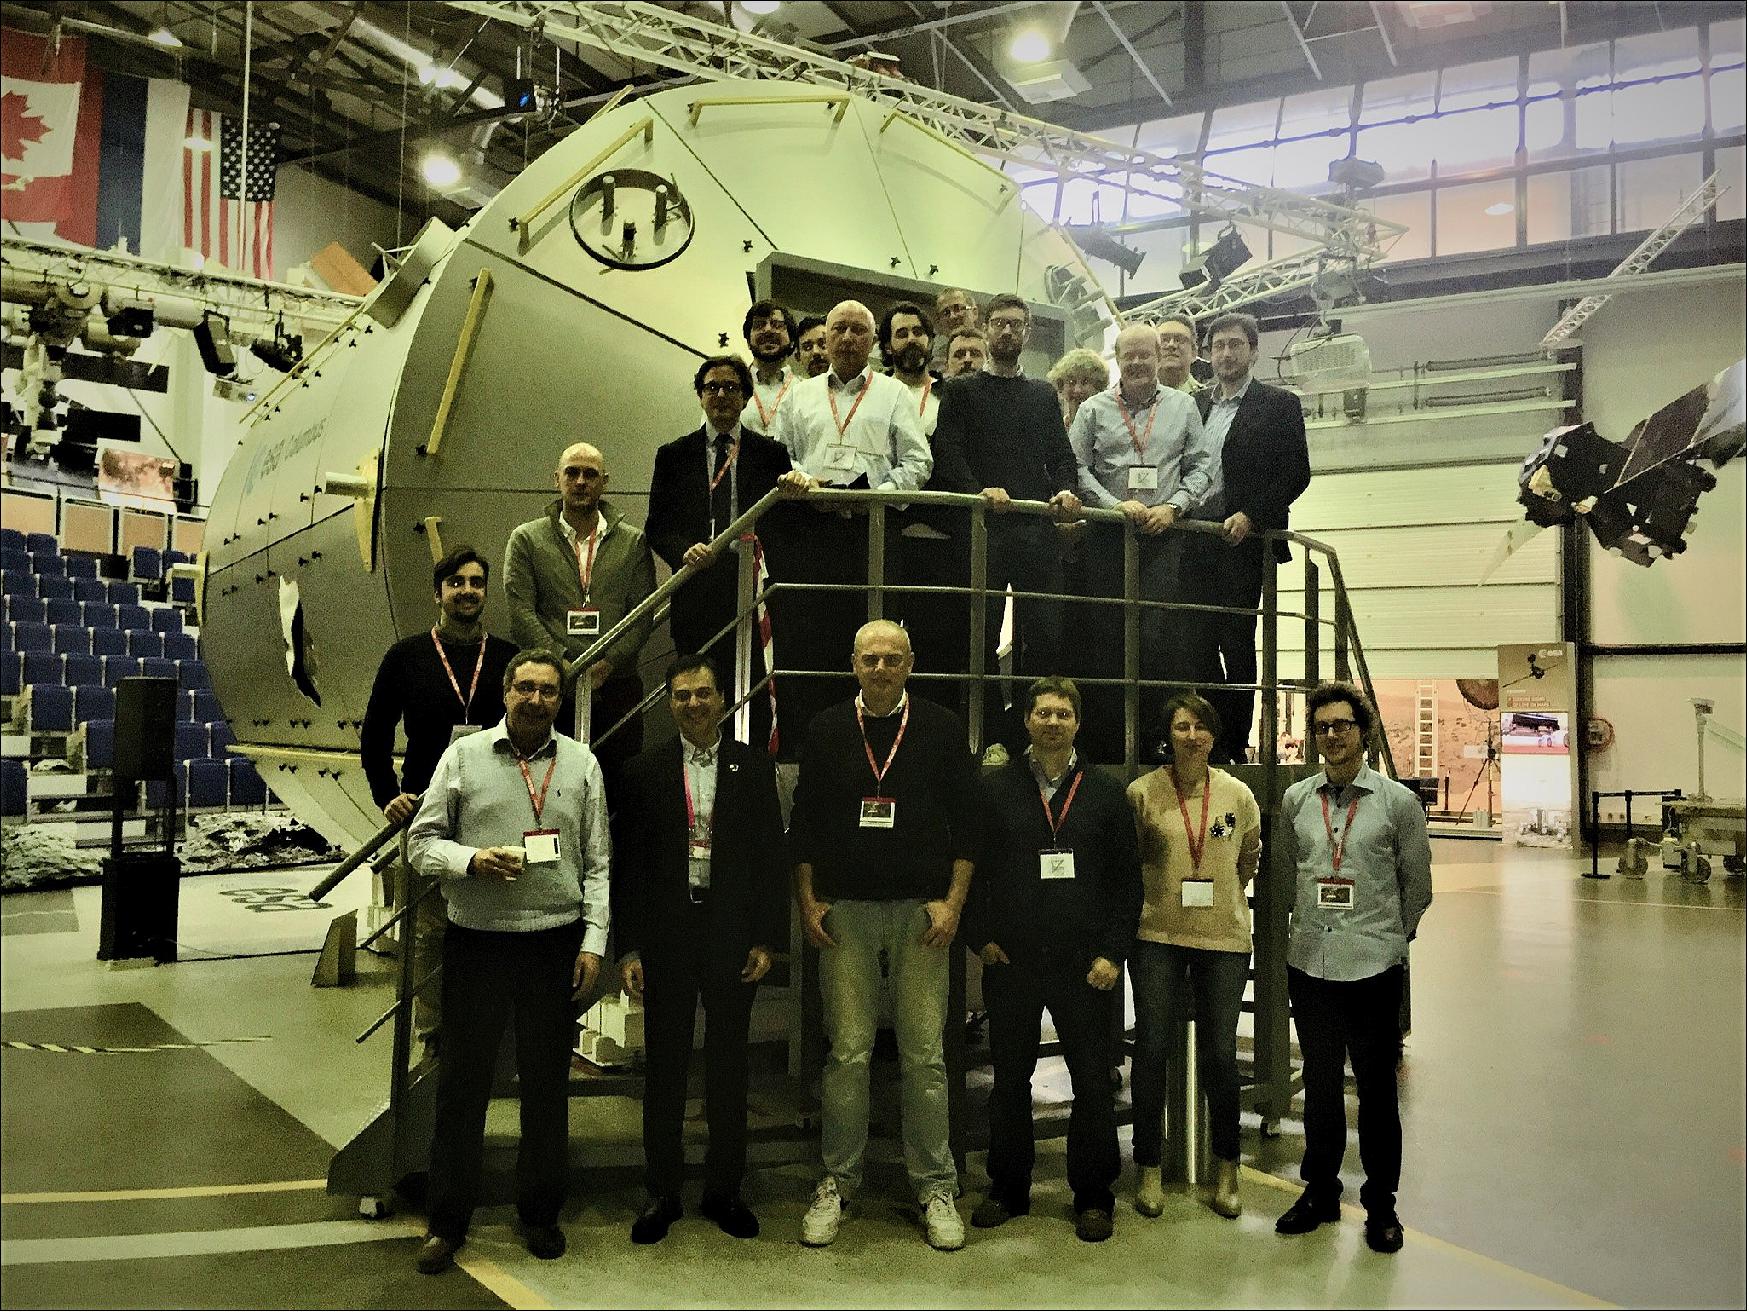 Figure 12: Multiscale Boiling experiment science team. Members of the RUBI (Reference mUltiscale Boiling Investigation) science team with ESA project scientist, BUSOC (Belgium User Support Operations Center) operators, and Airbus during a meeting at ESA's technical center in the Netherlands (image credit: ESA)